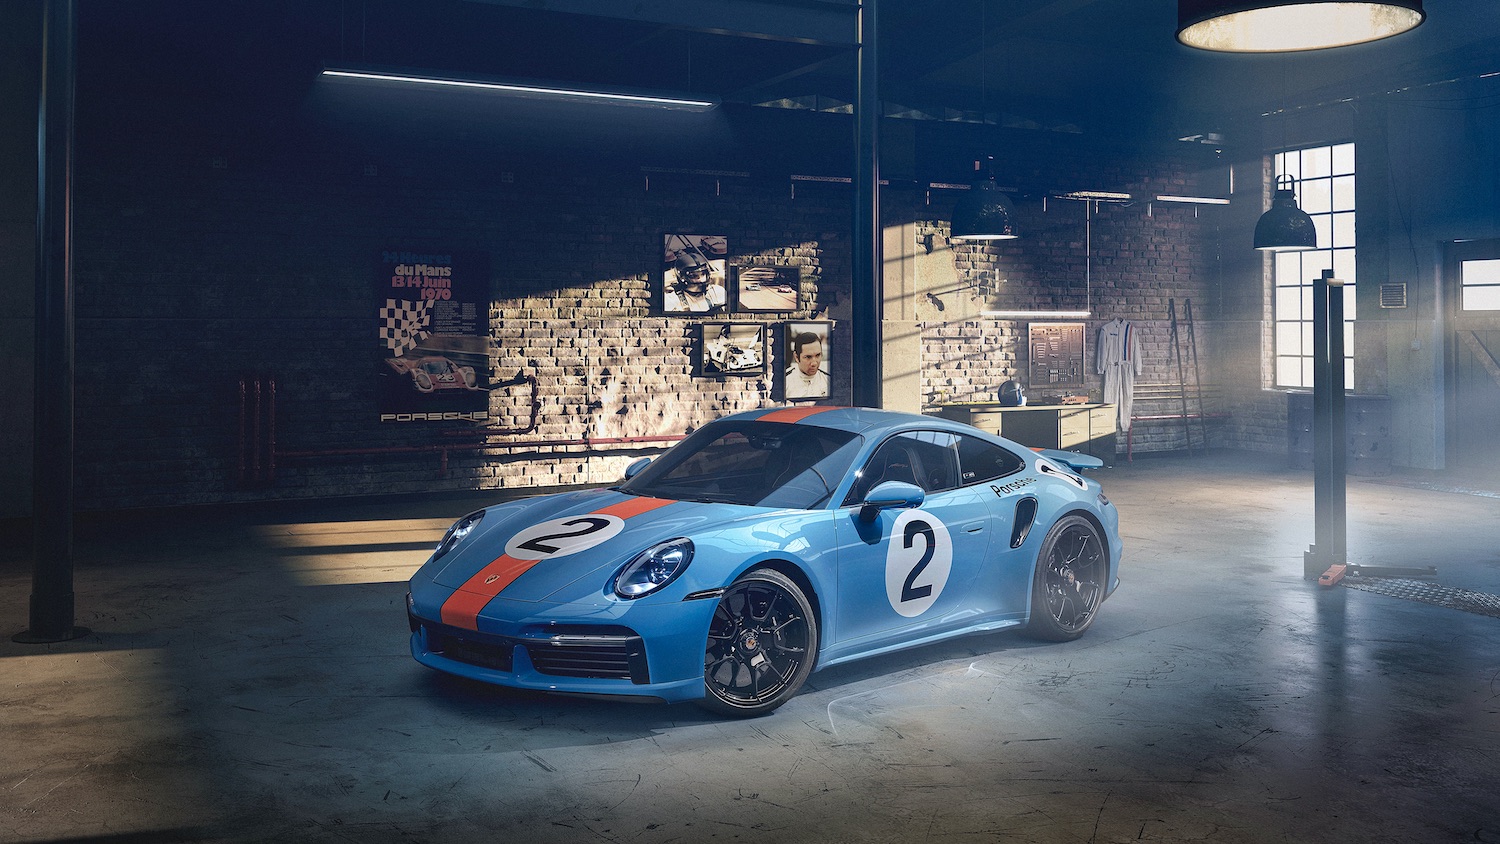 A blue and orange Porsche 911 special edition painted in Gulf Oil motorsports racing livery colors.